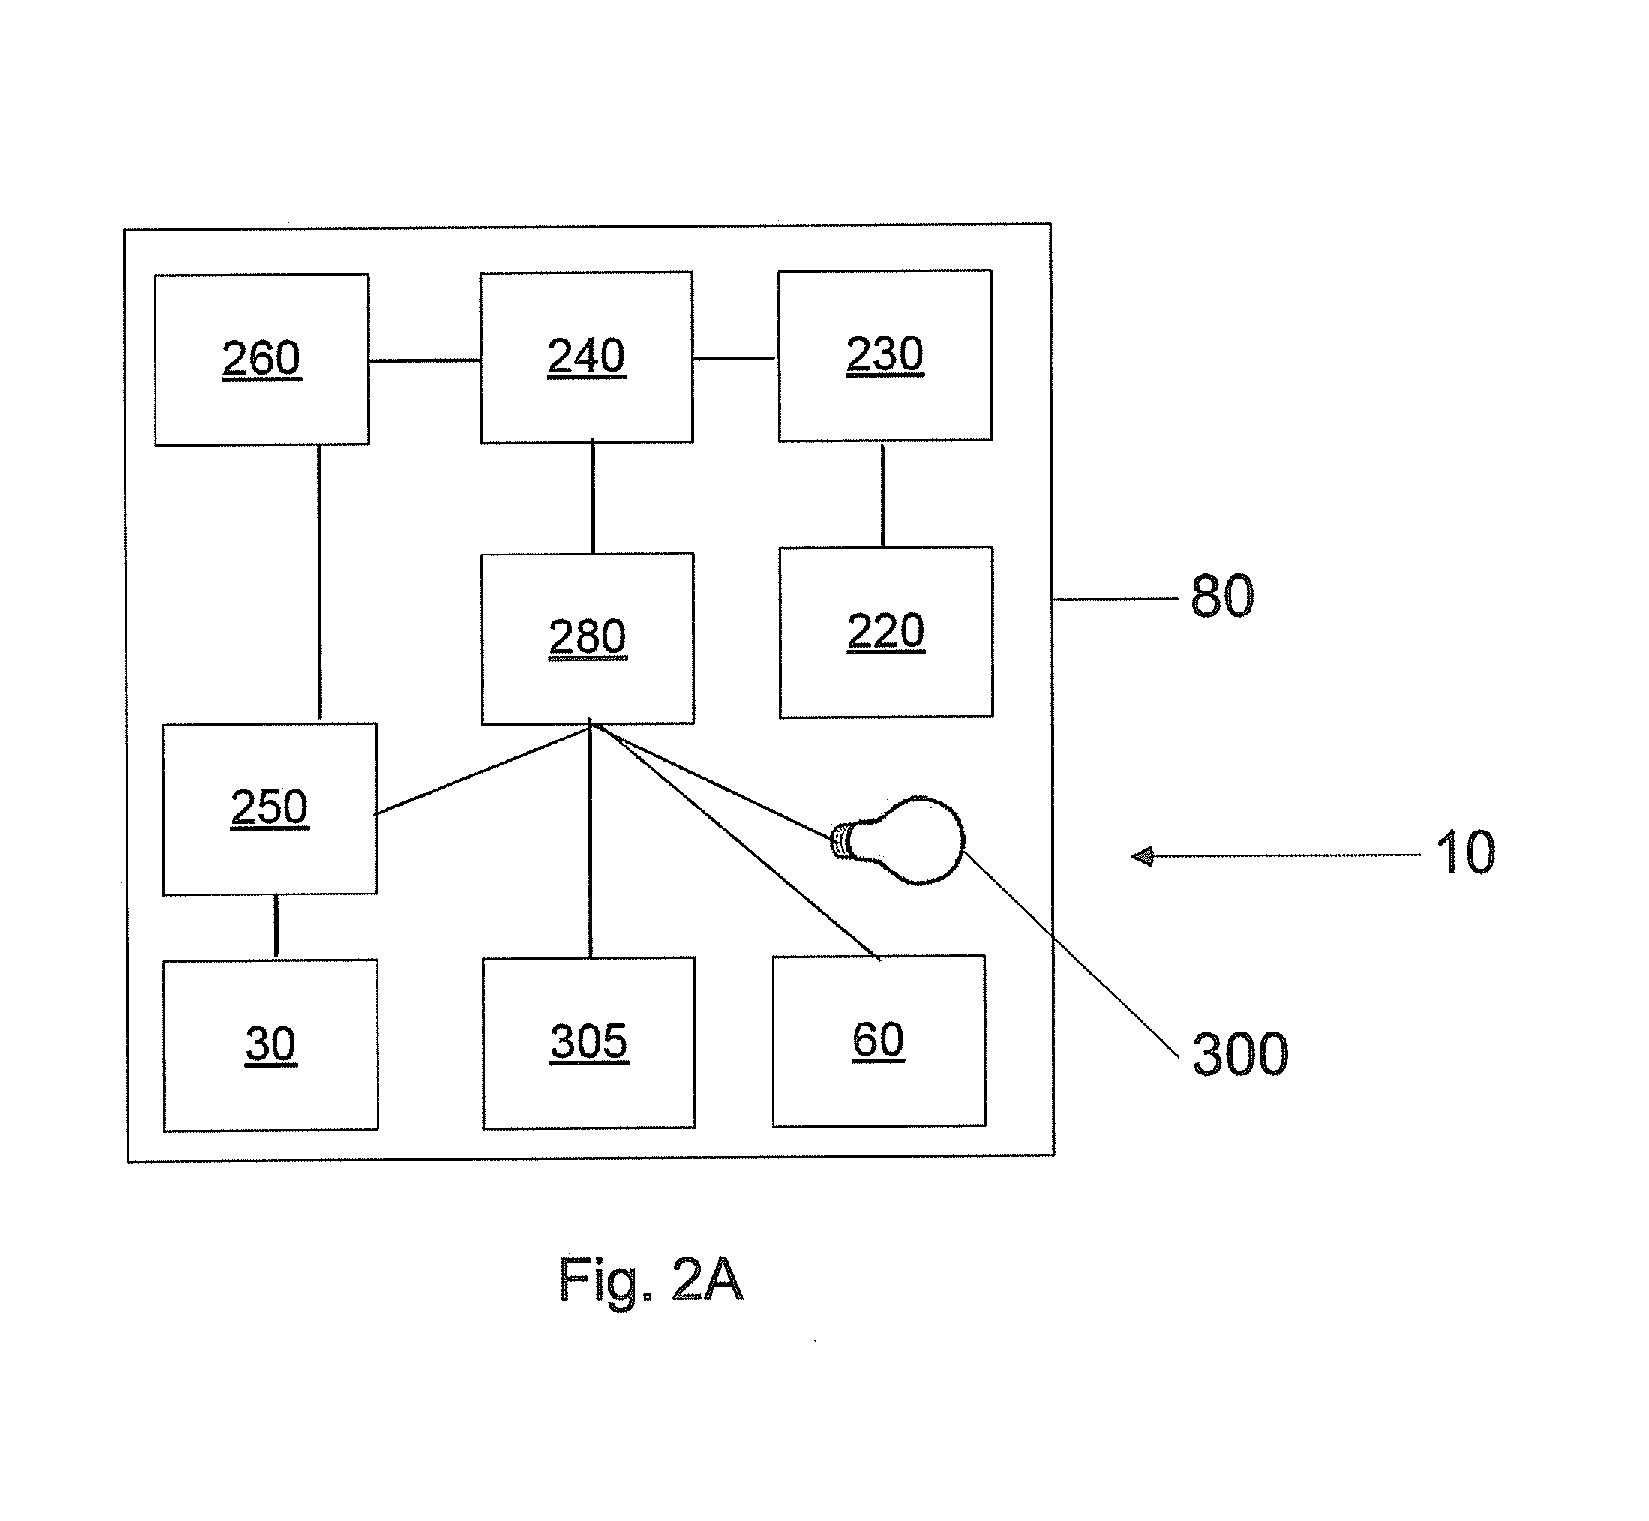 Automatic pool cleaner for cleaning a pool with minimum power consumption and method thereof